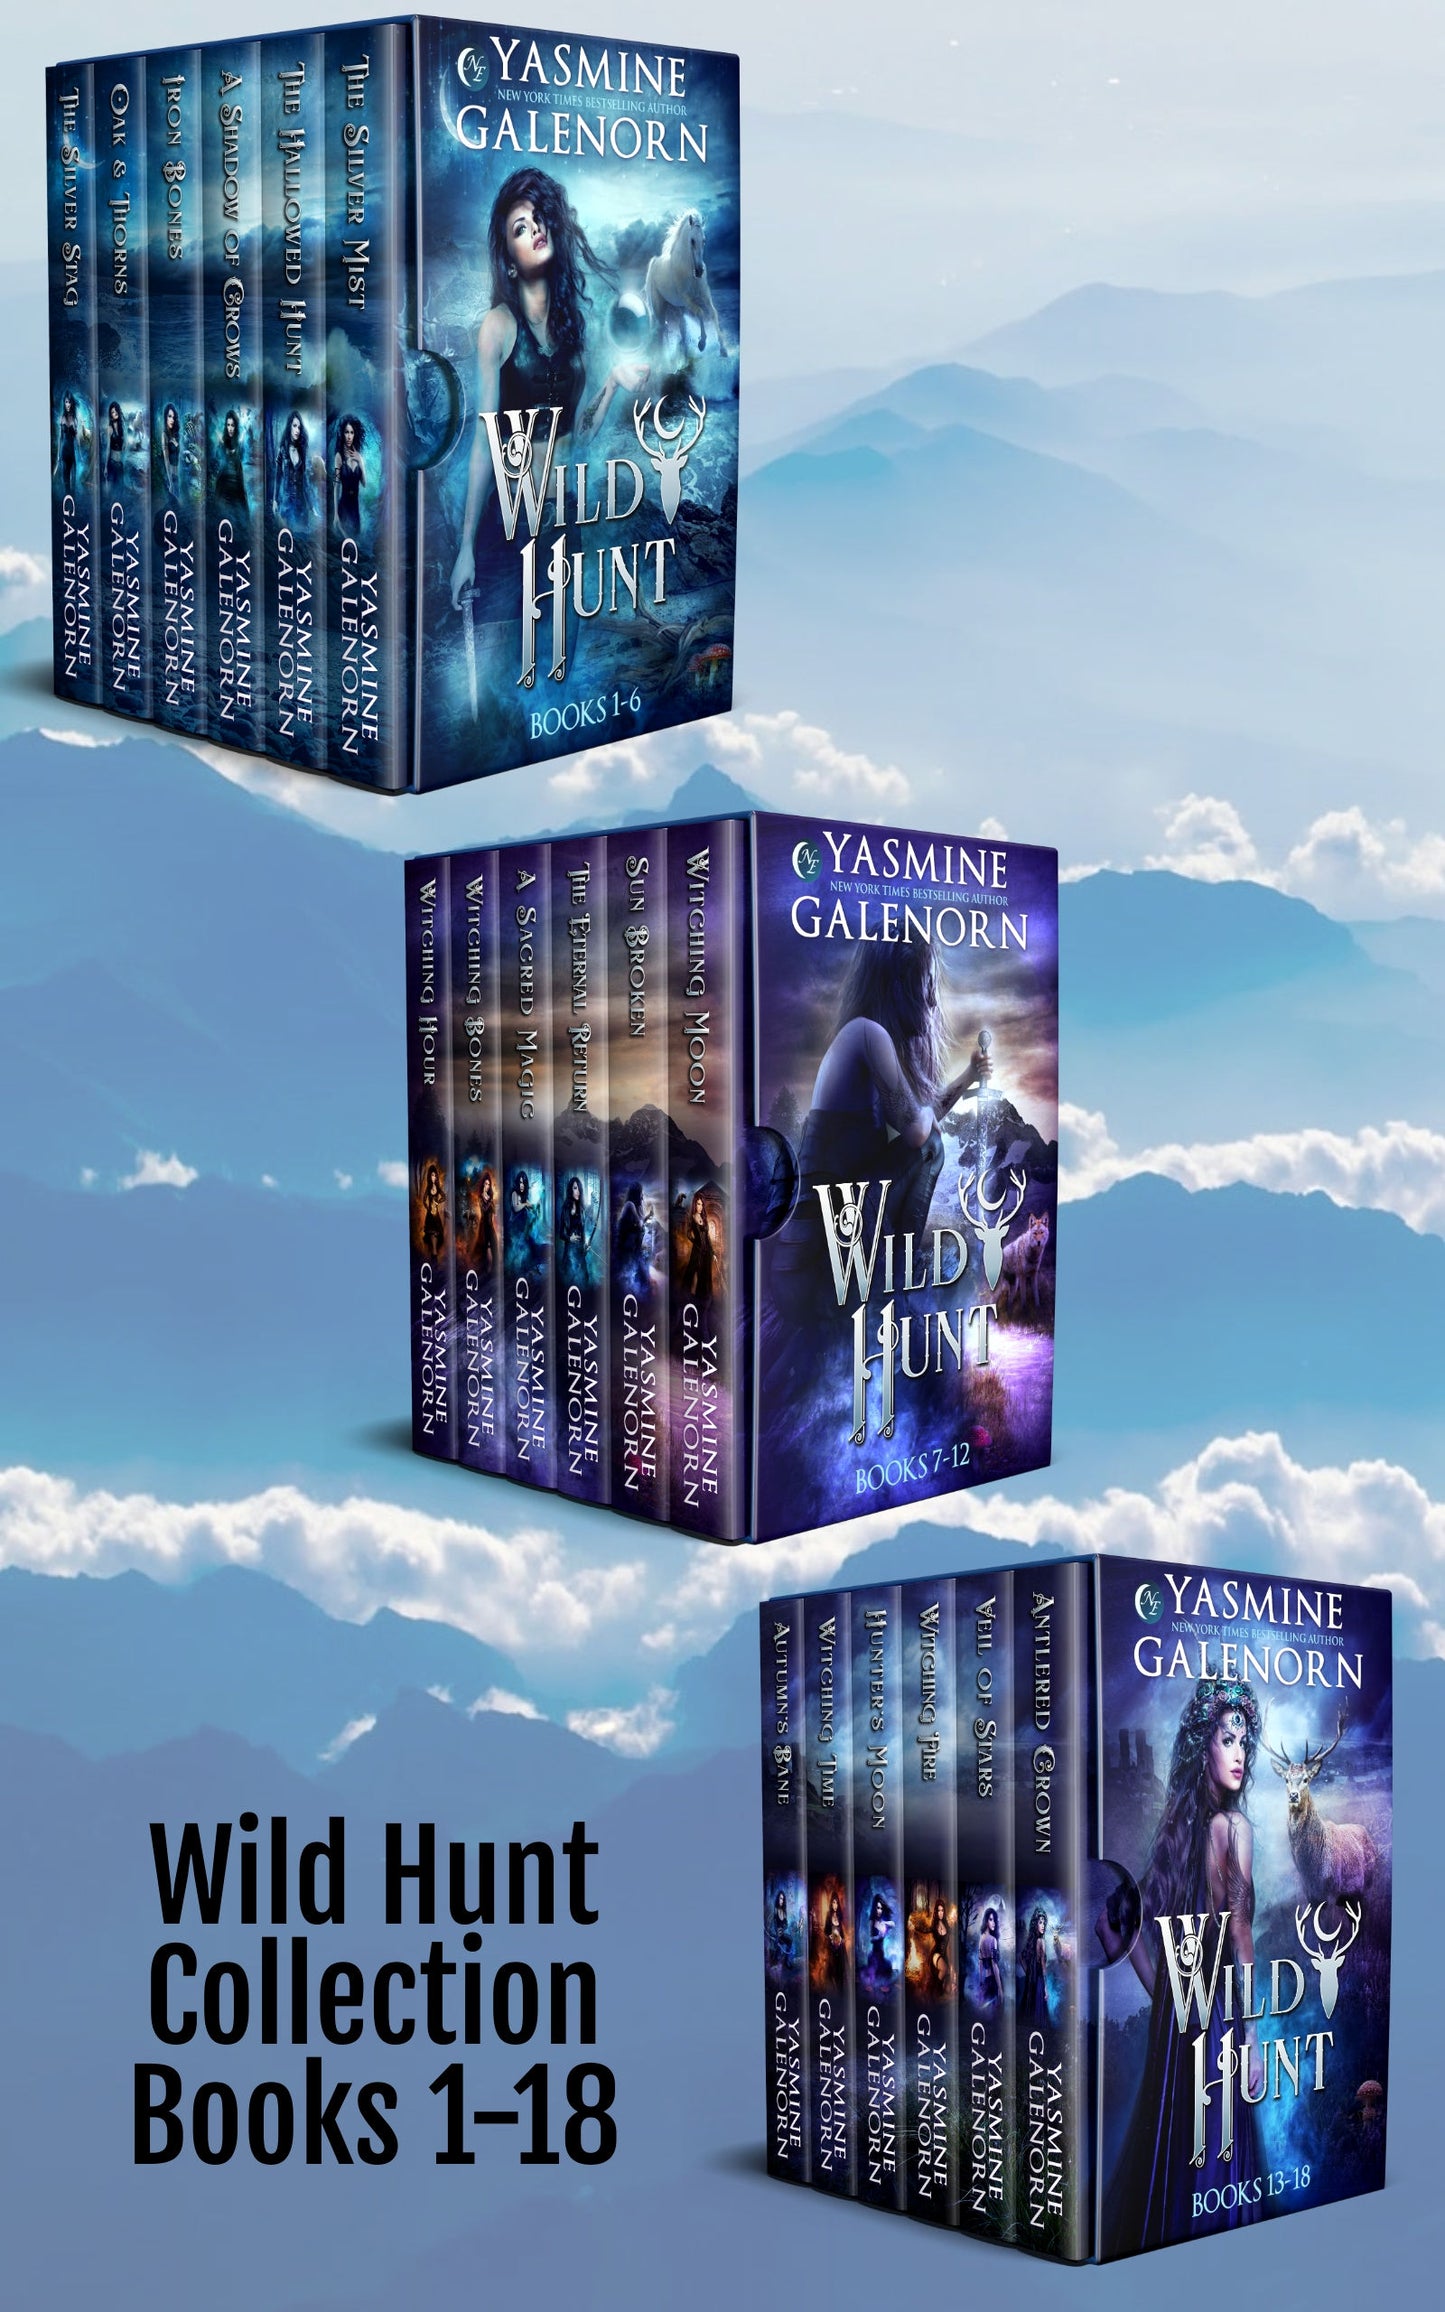 Wild Hunt Collection Books 1-18